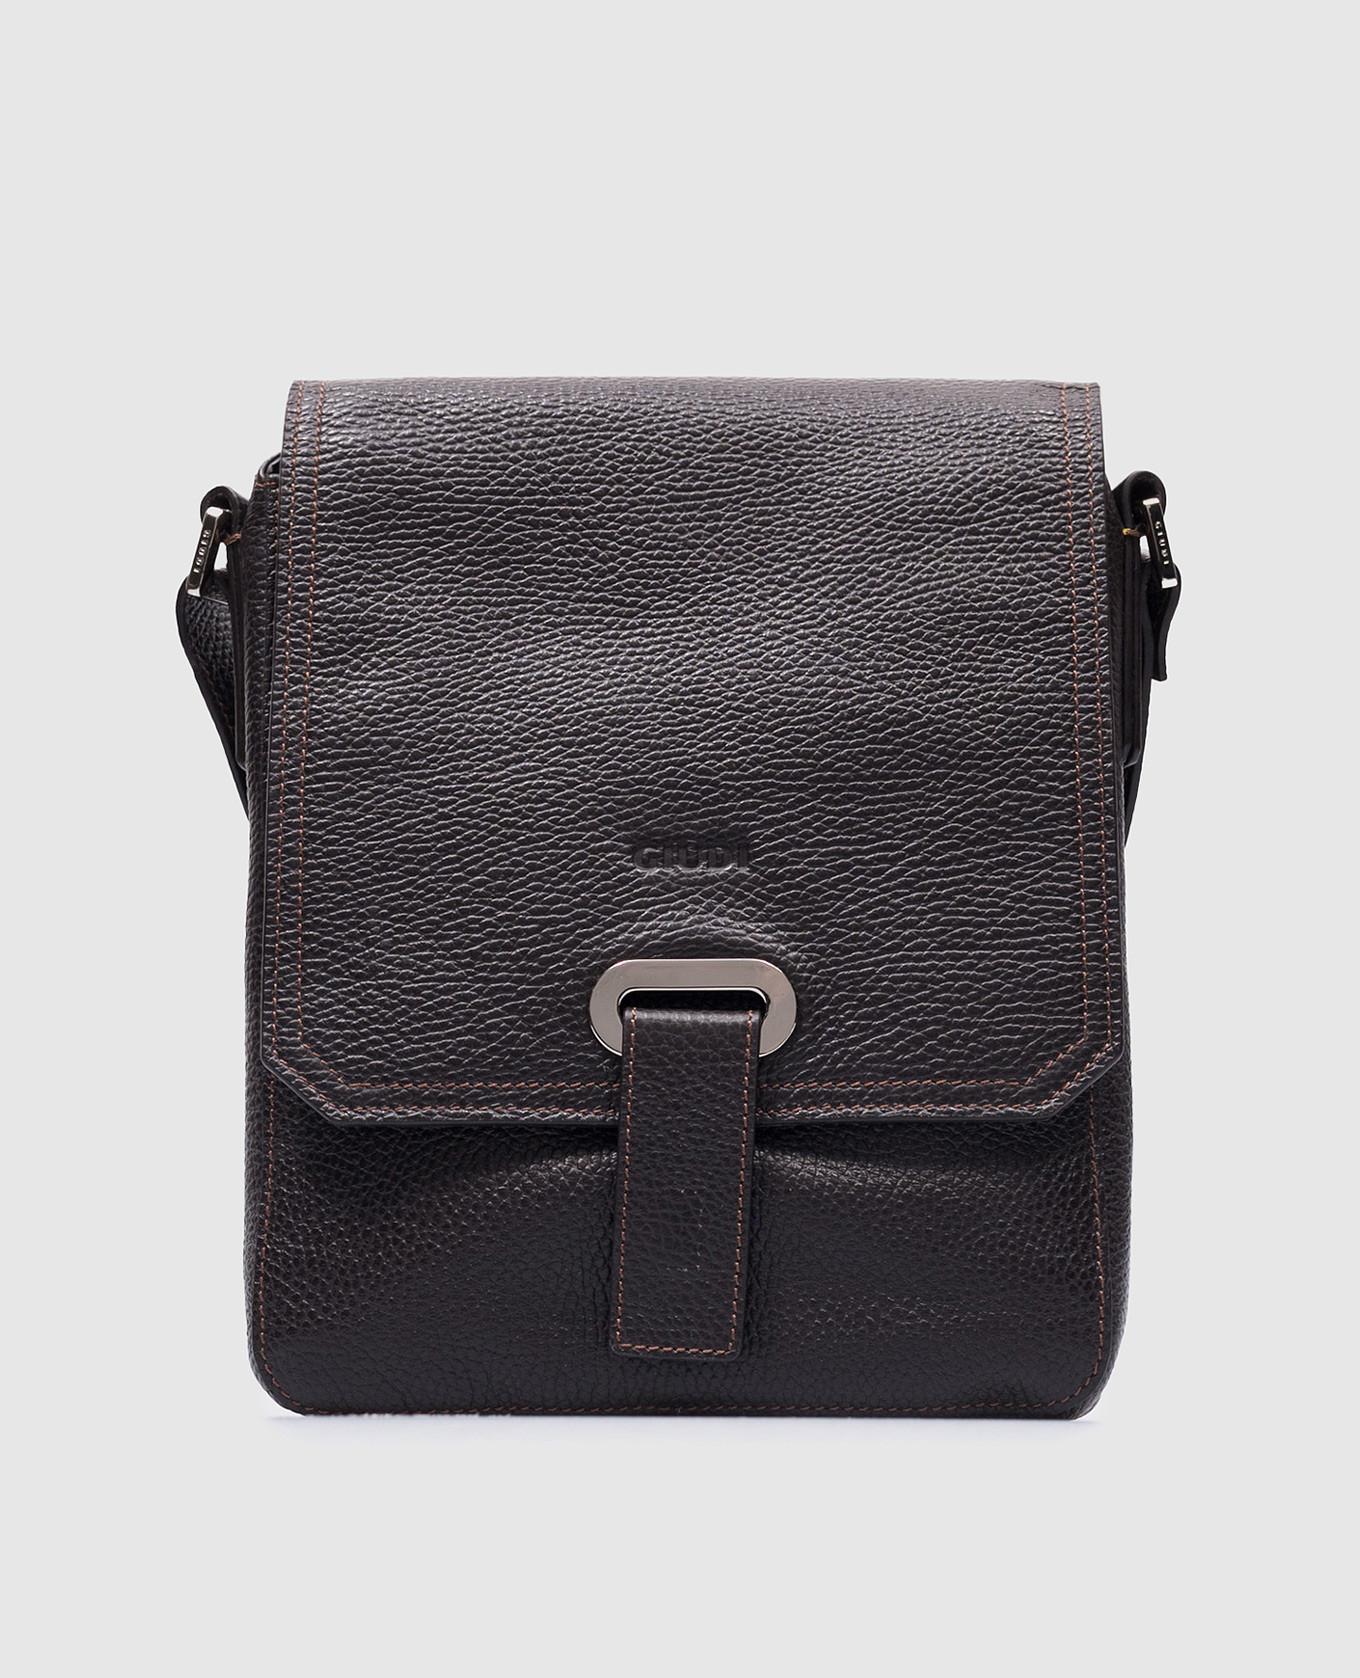 Brown leather messenger bag with embossed logo